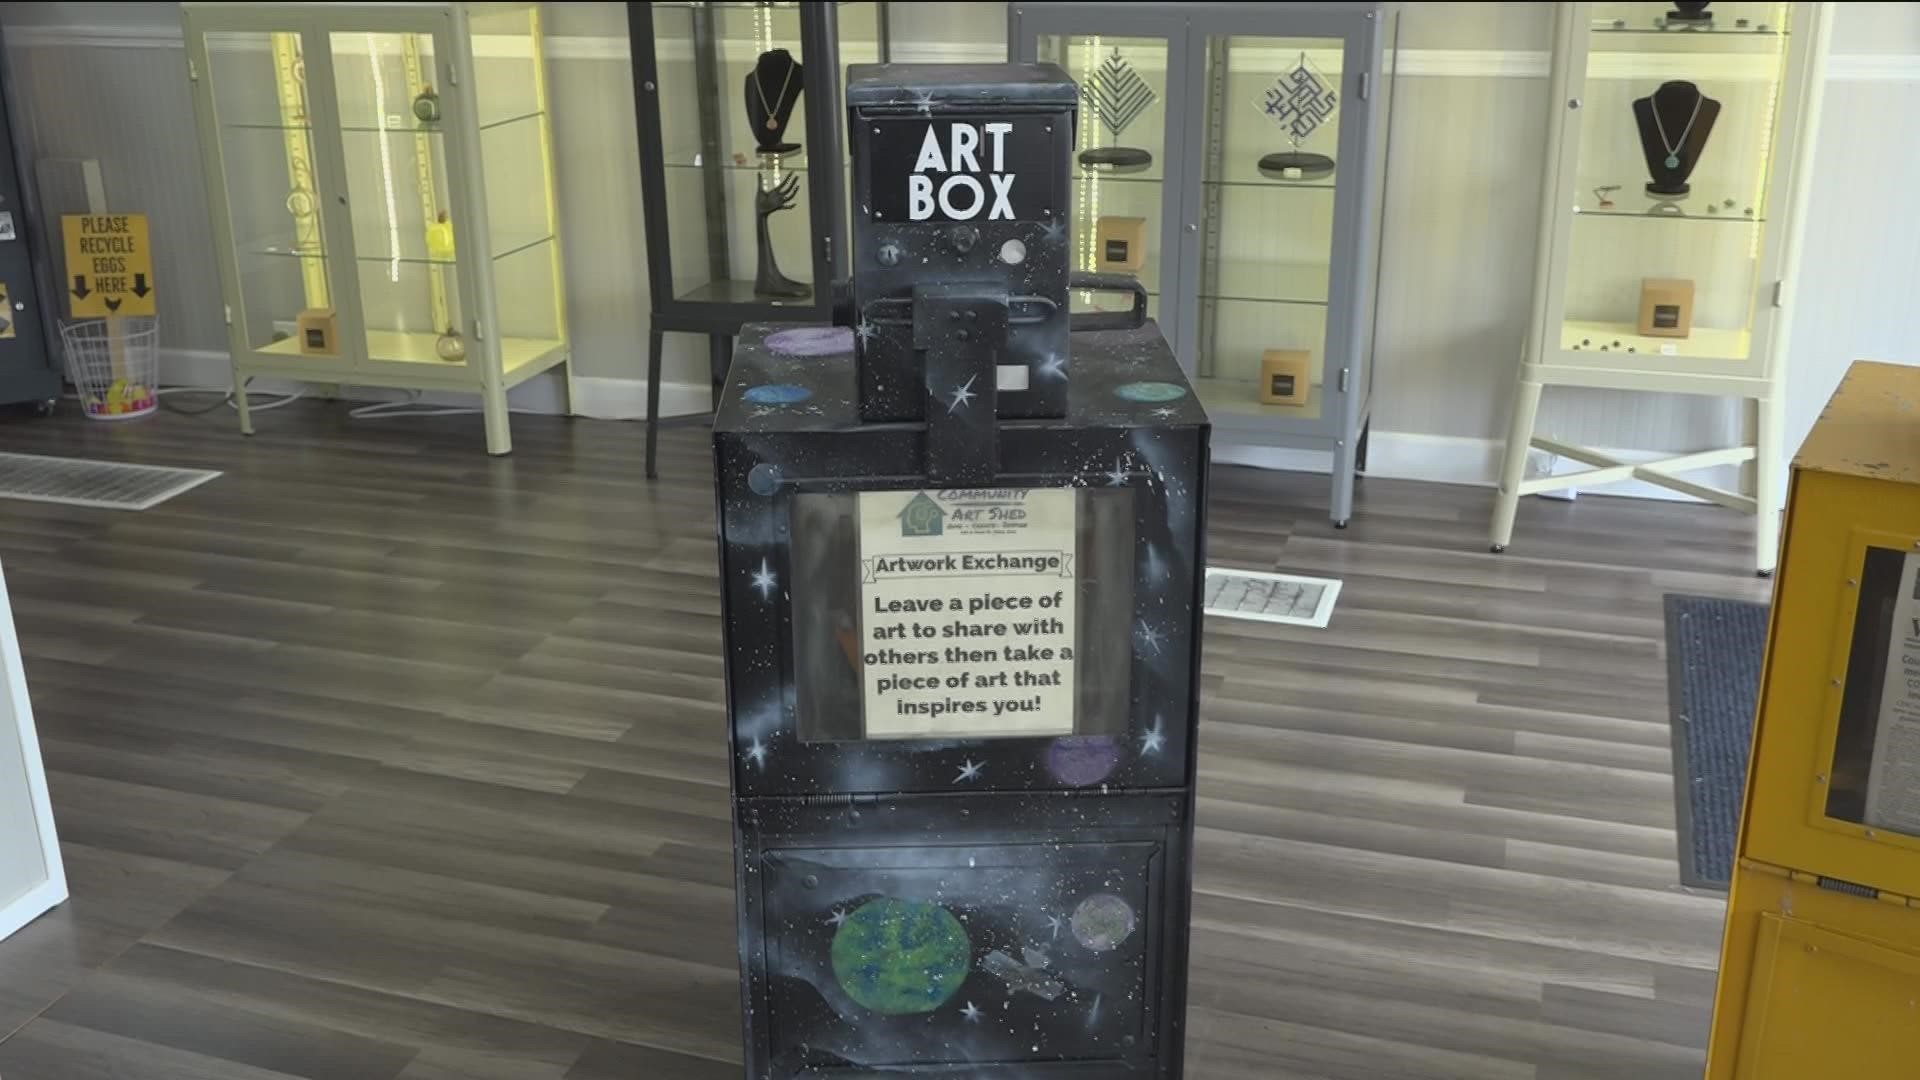 The Art Boxes are refurbished from repurposed newspaper racks. Artists and residents will be able to leave artwork or take a piece from the box for free.